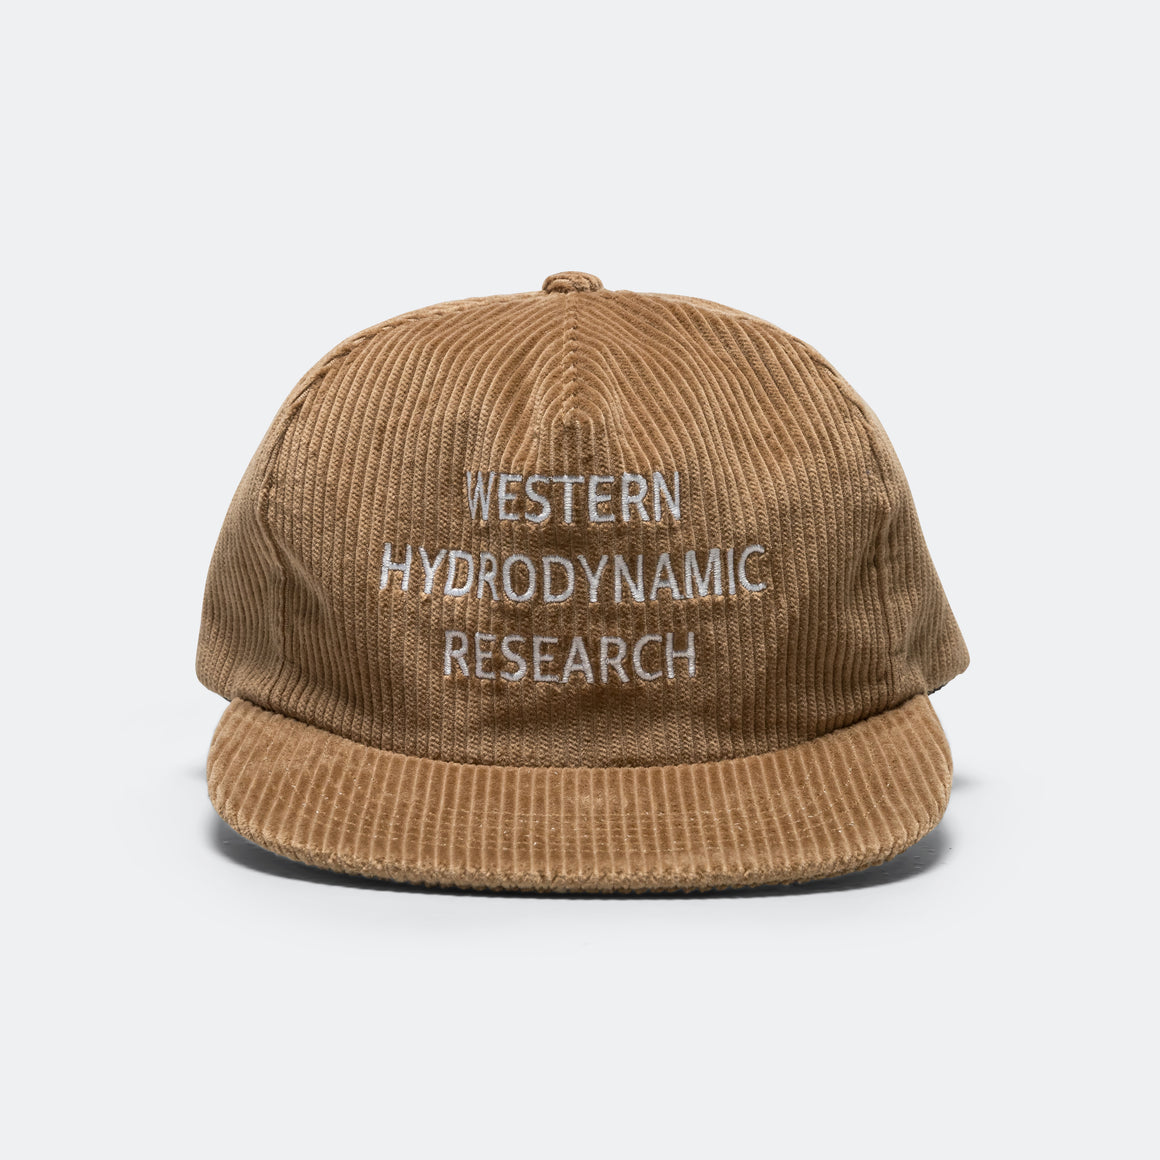 Western Hydrodynamic Research - Whale Cord Hat - Brown - UP THERE